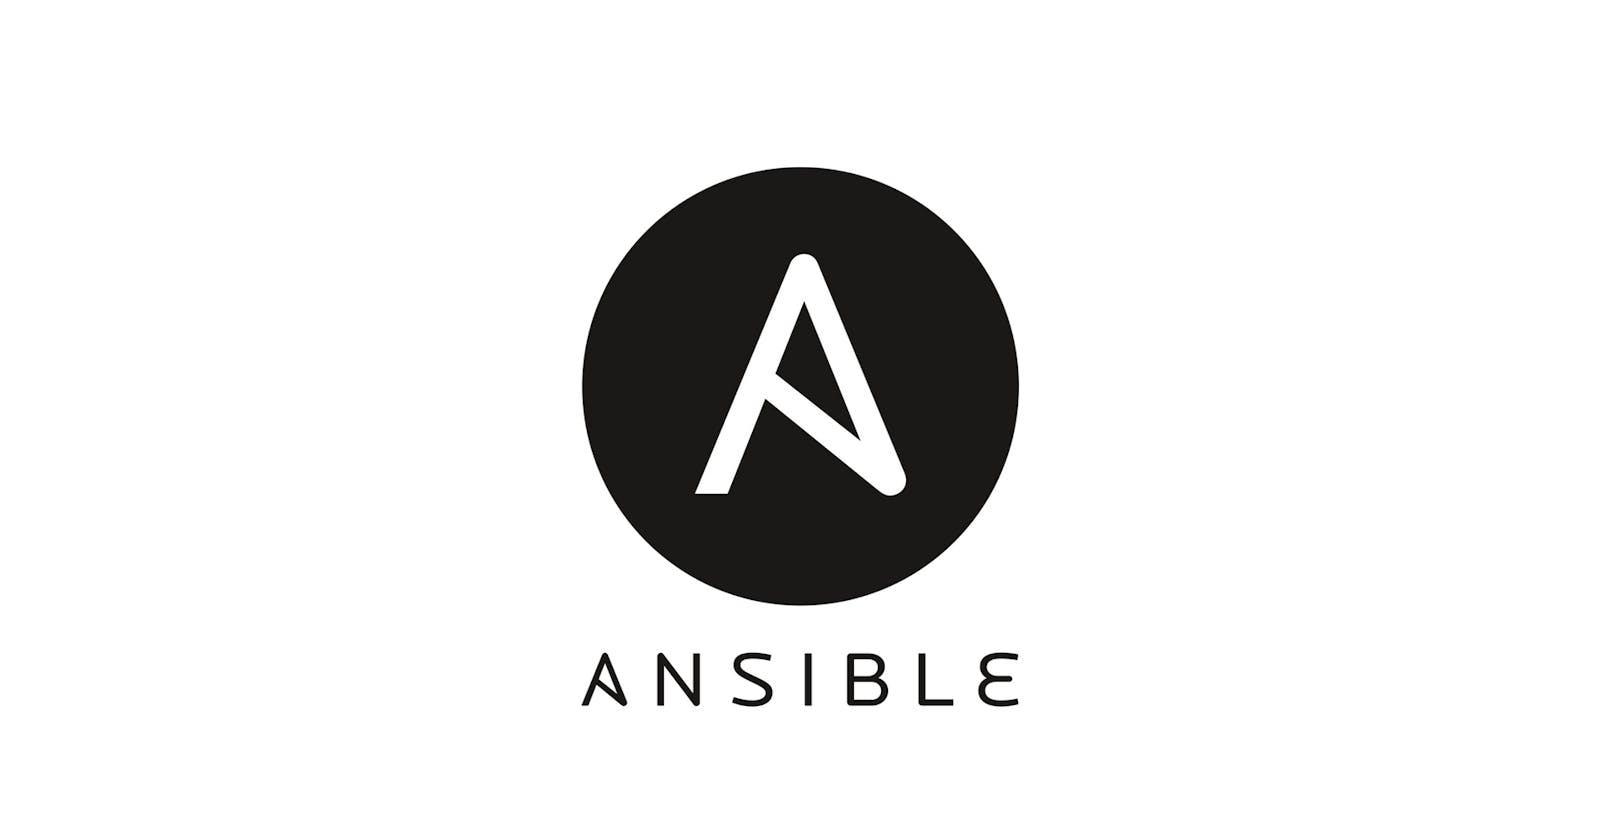 What is Ansible ?